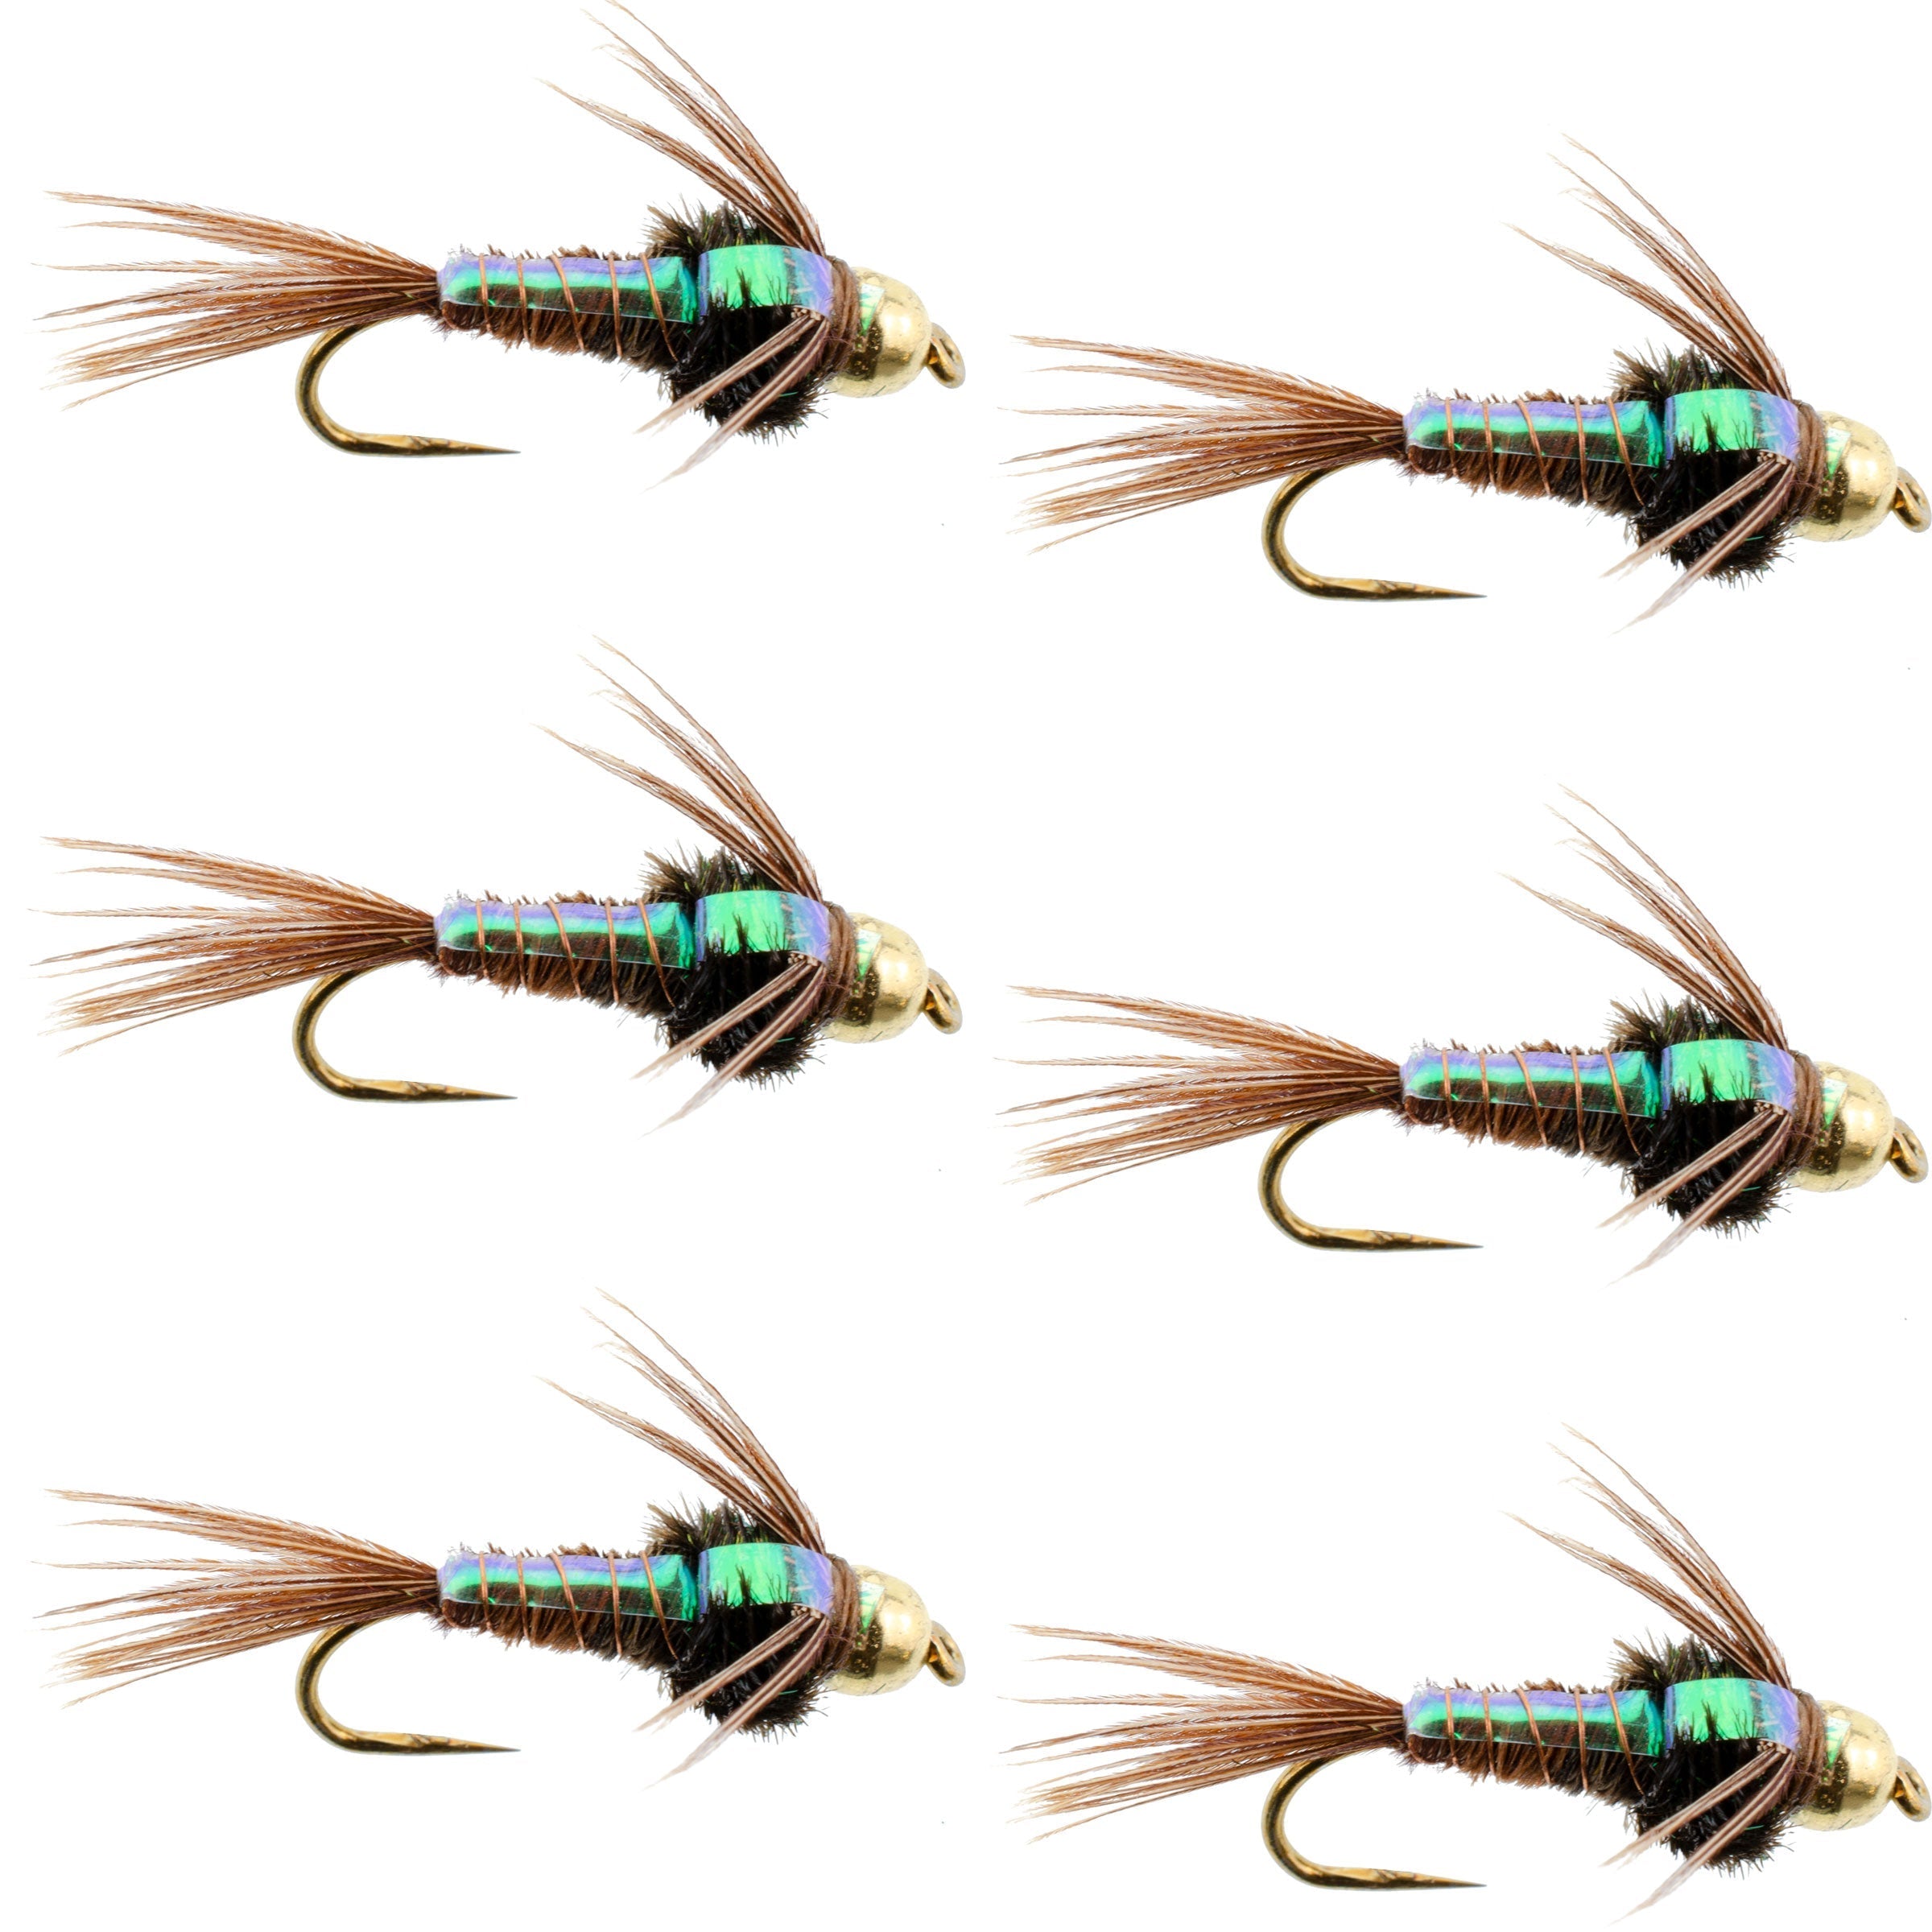 Barbless Bead Head Flashback Pheasant Tail Nymph Fly 6 Flies Hook Size 16